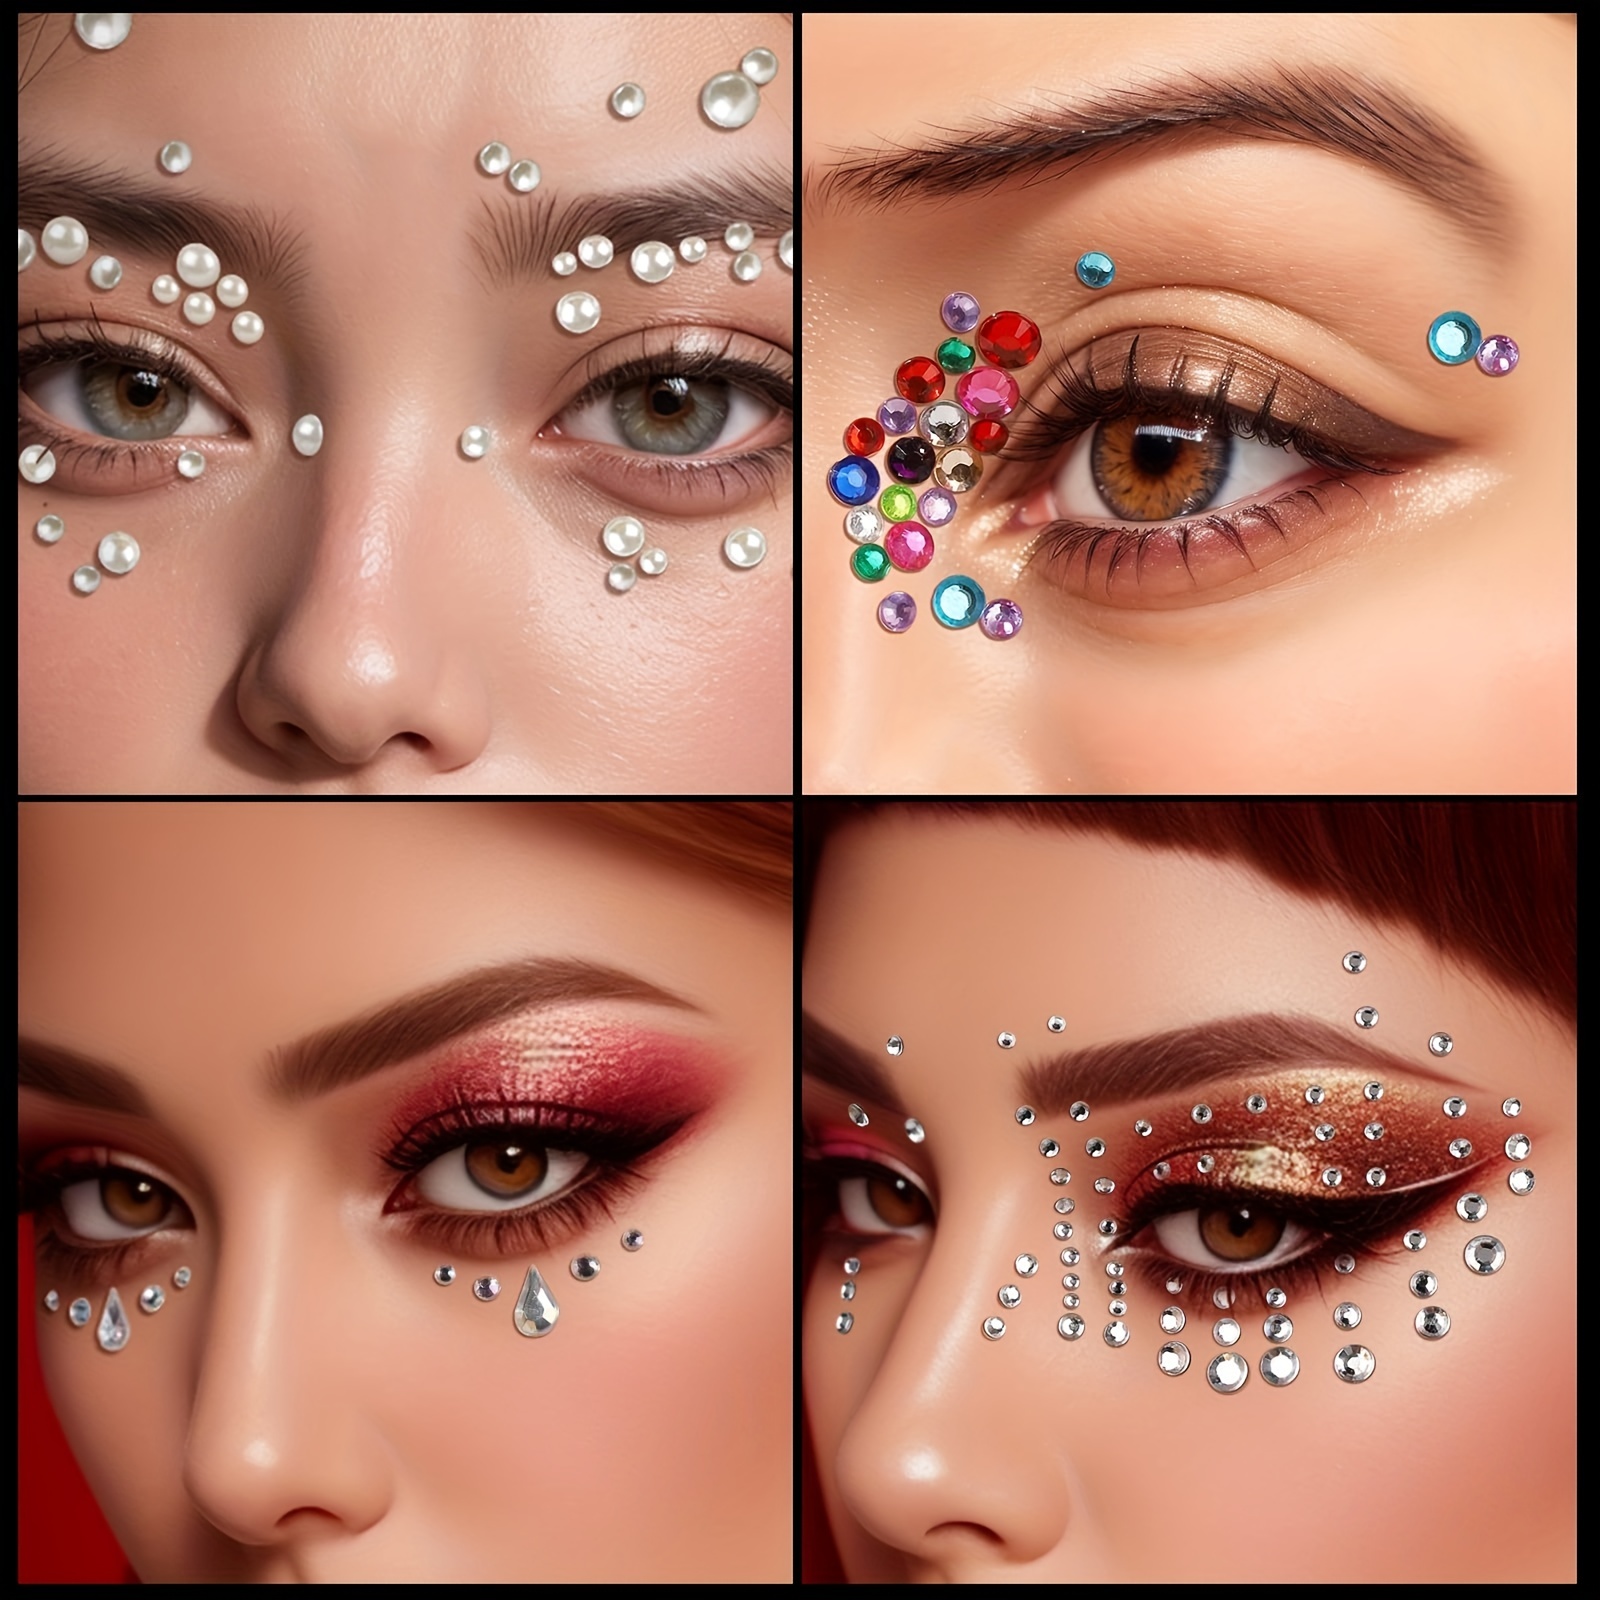 975 Pcs Of Pearl Stickers Self-Adhesive Decorative Stickers, Face Makeup  And Face Makeup Accessories Pearl Stickers, Diamond Face Makeup Stickers,  Face Accessories, Eye Corner And Eyebrow Stickers, Bridal Eye Makeup And  Face